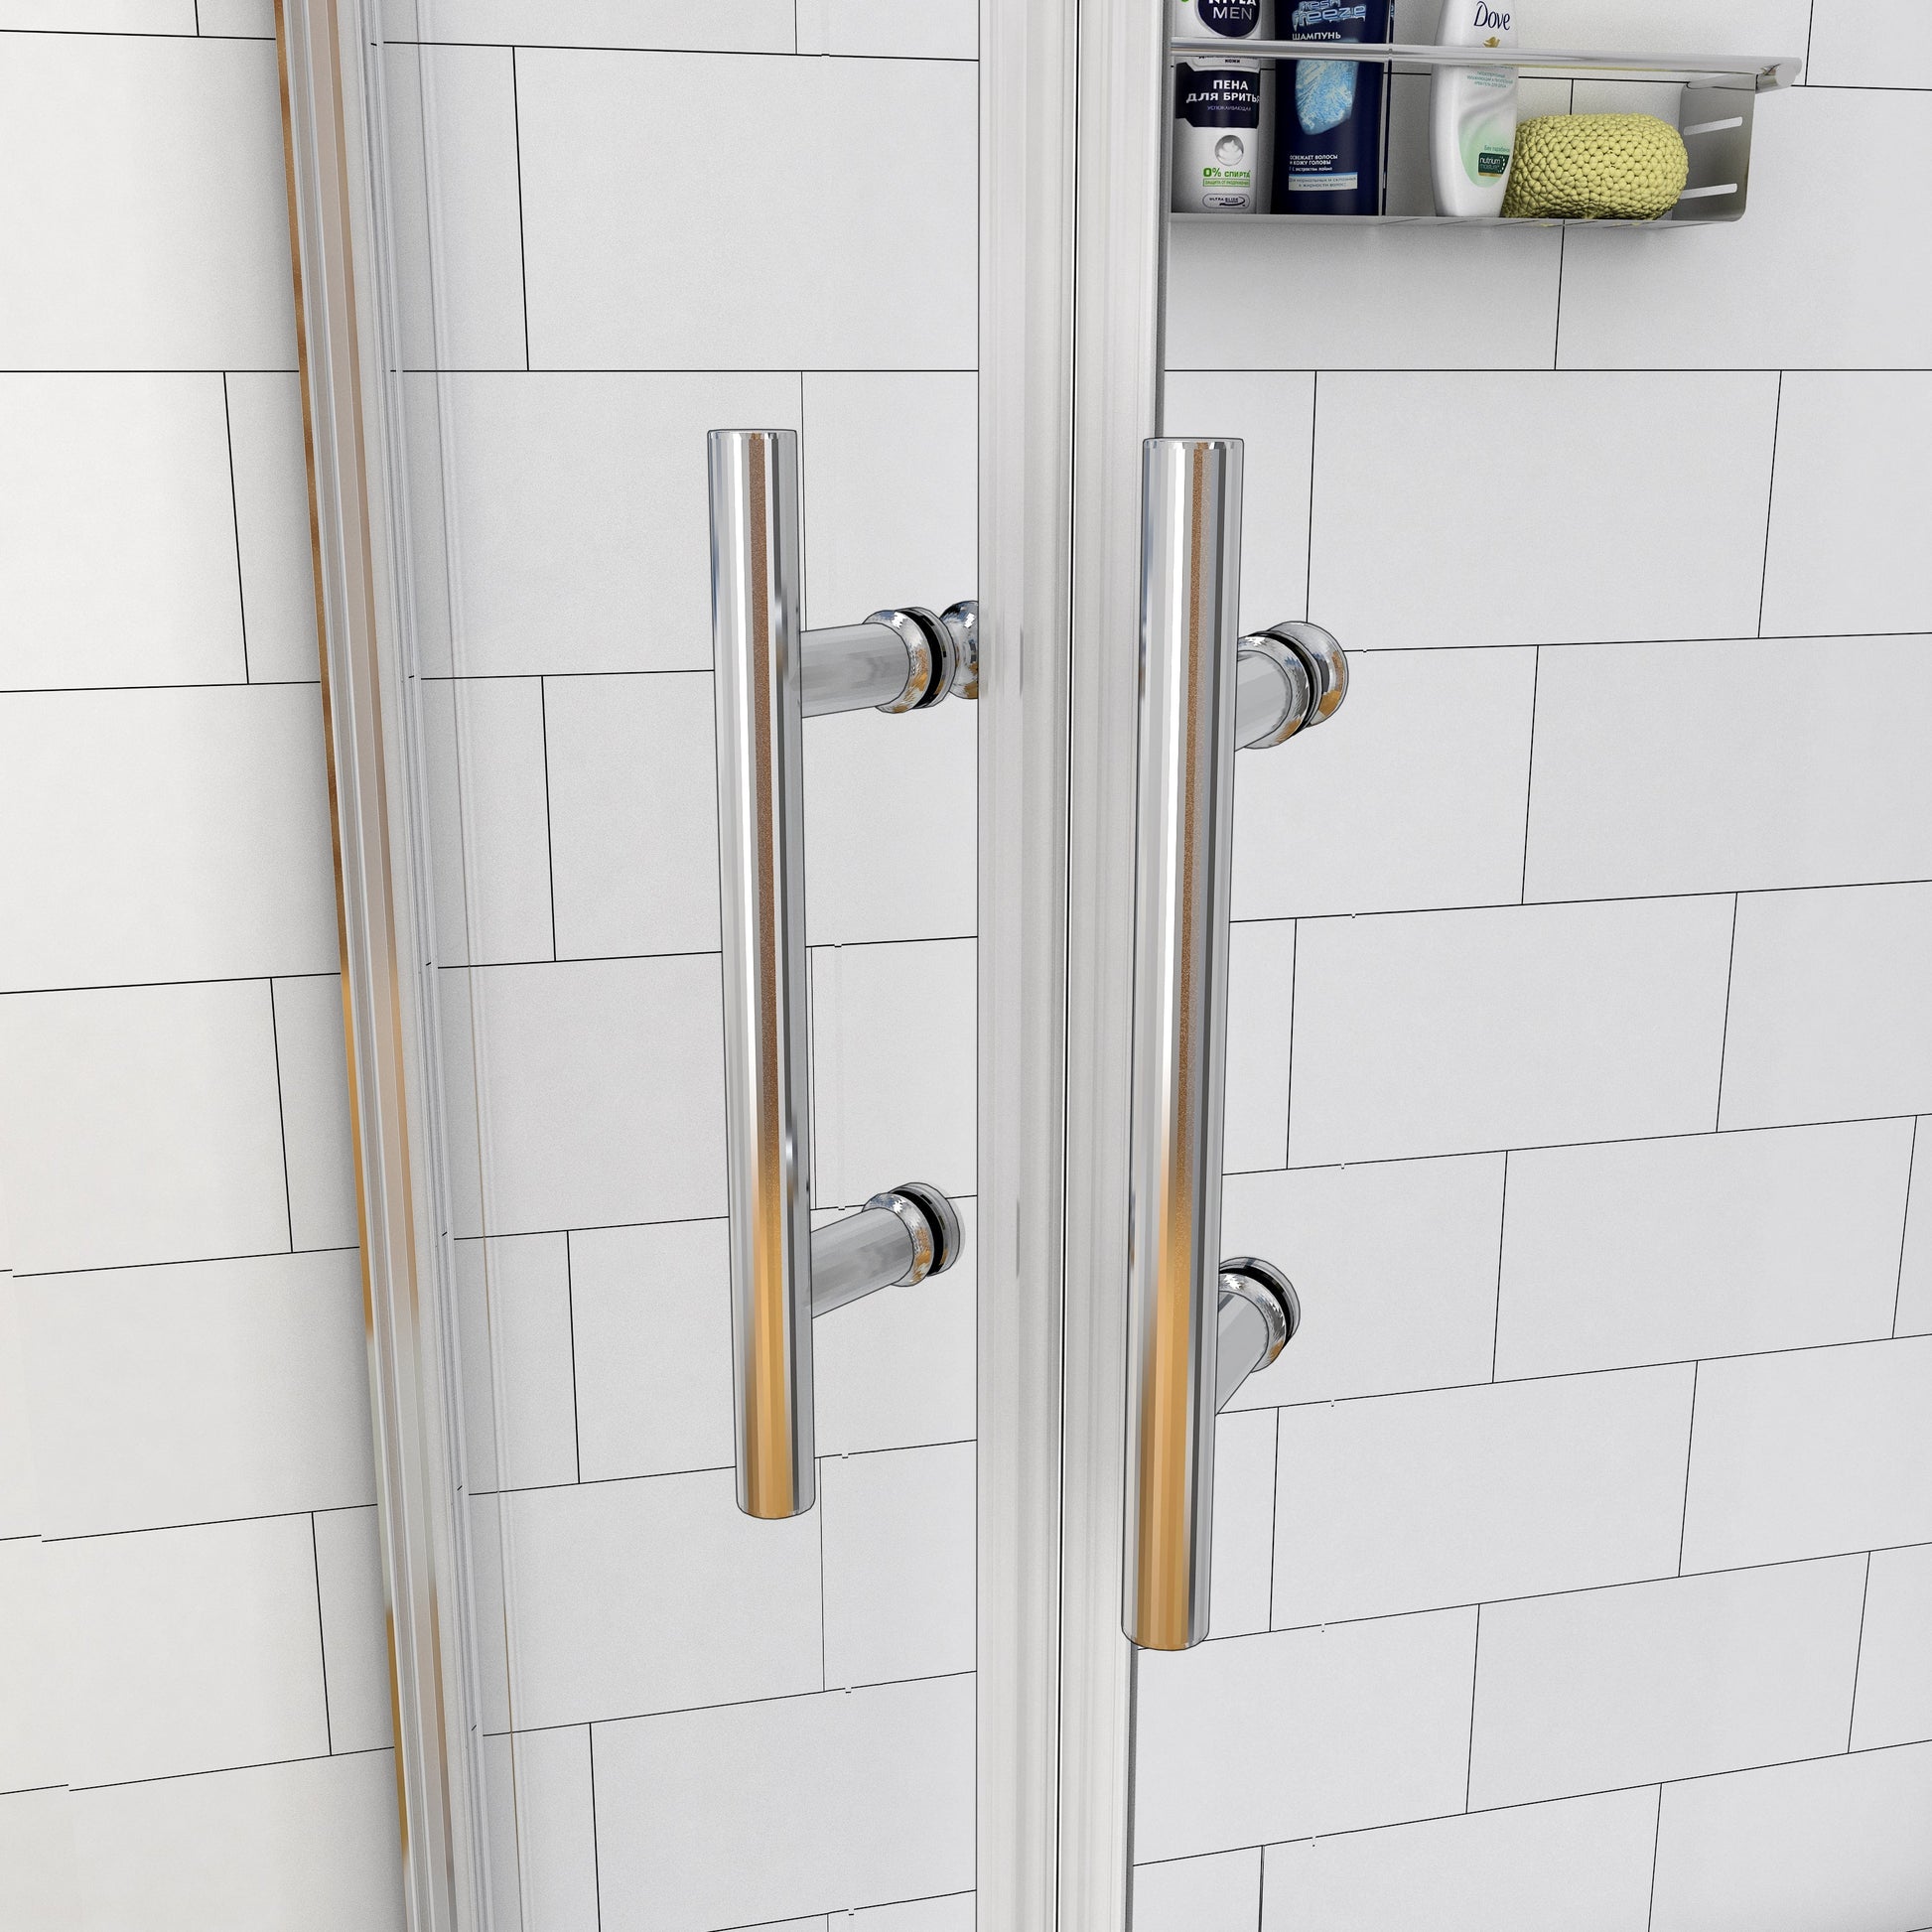 AICA Bathroom provides a series of shower products